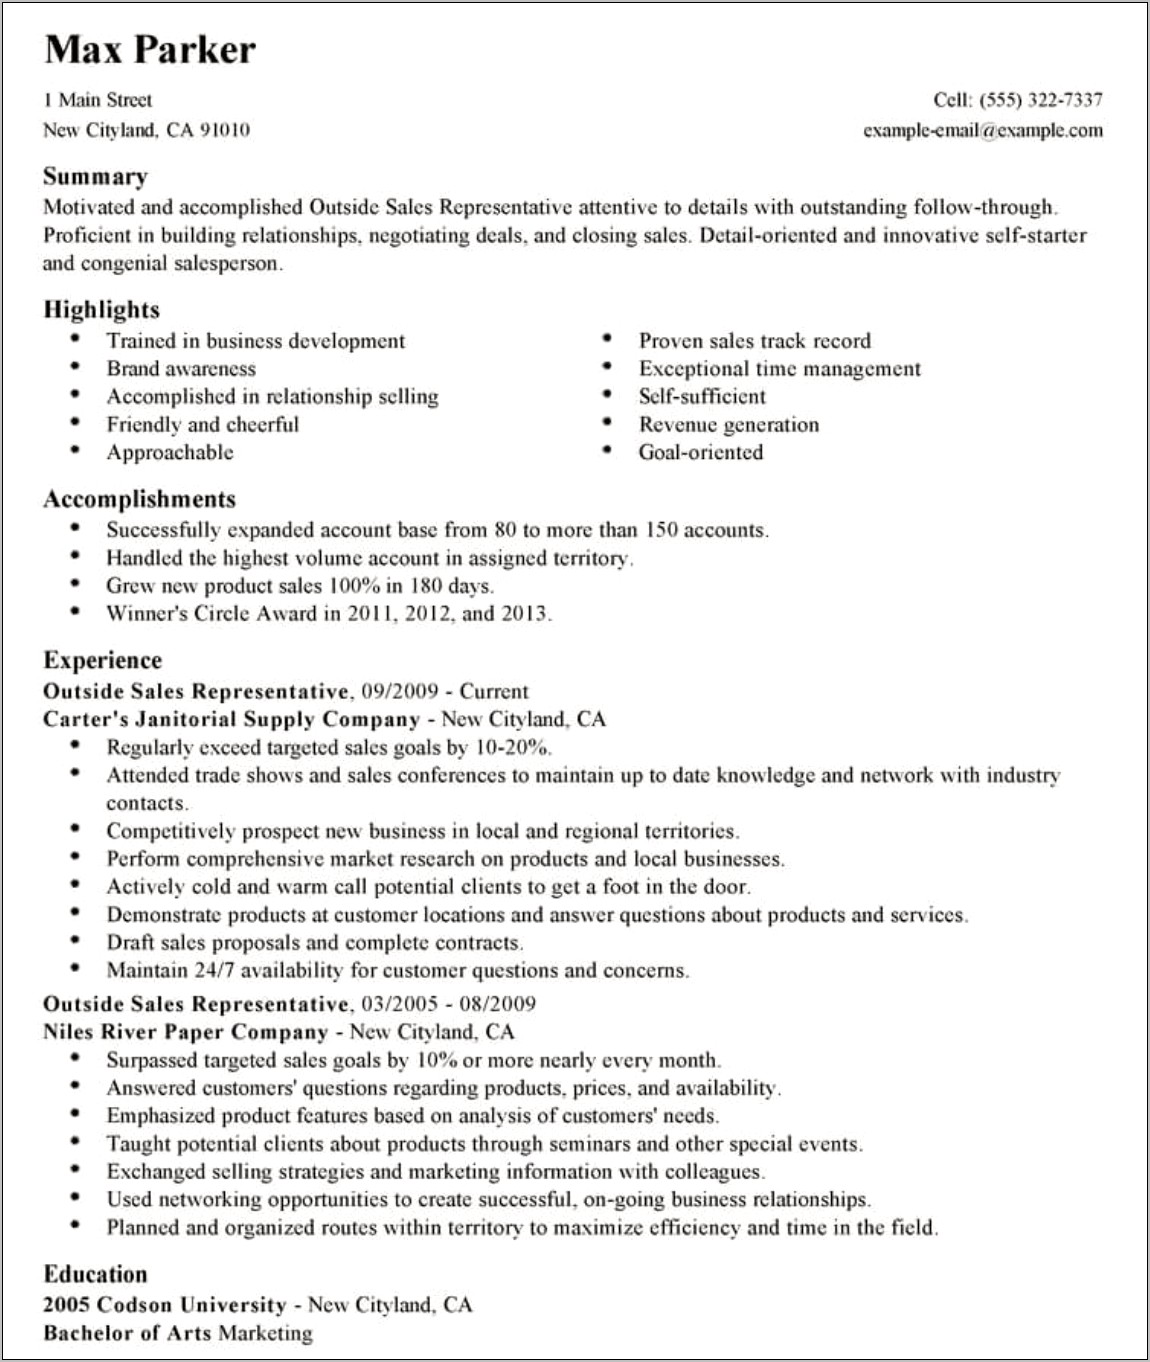 Example Resume Objective For Technical Lead